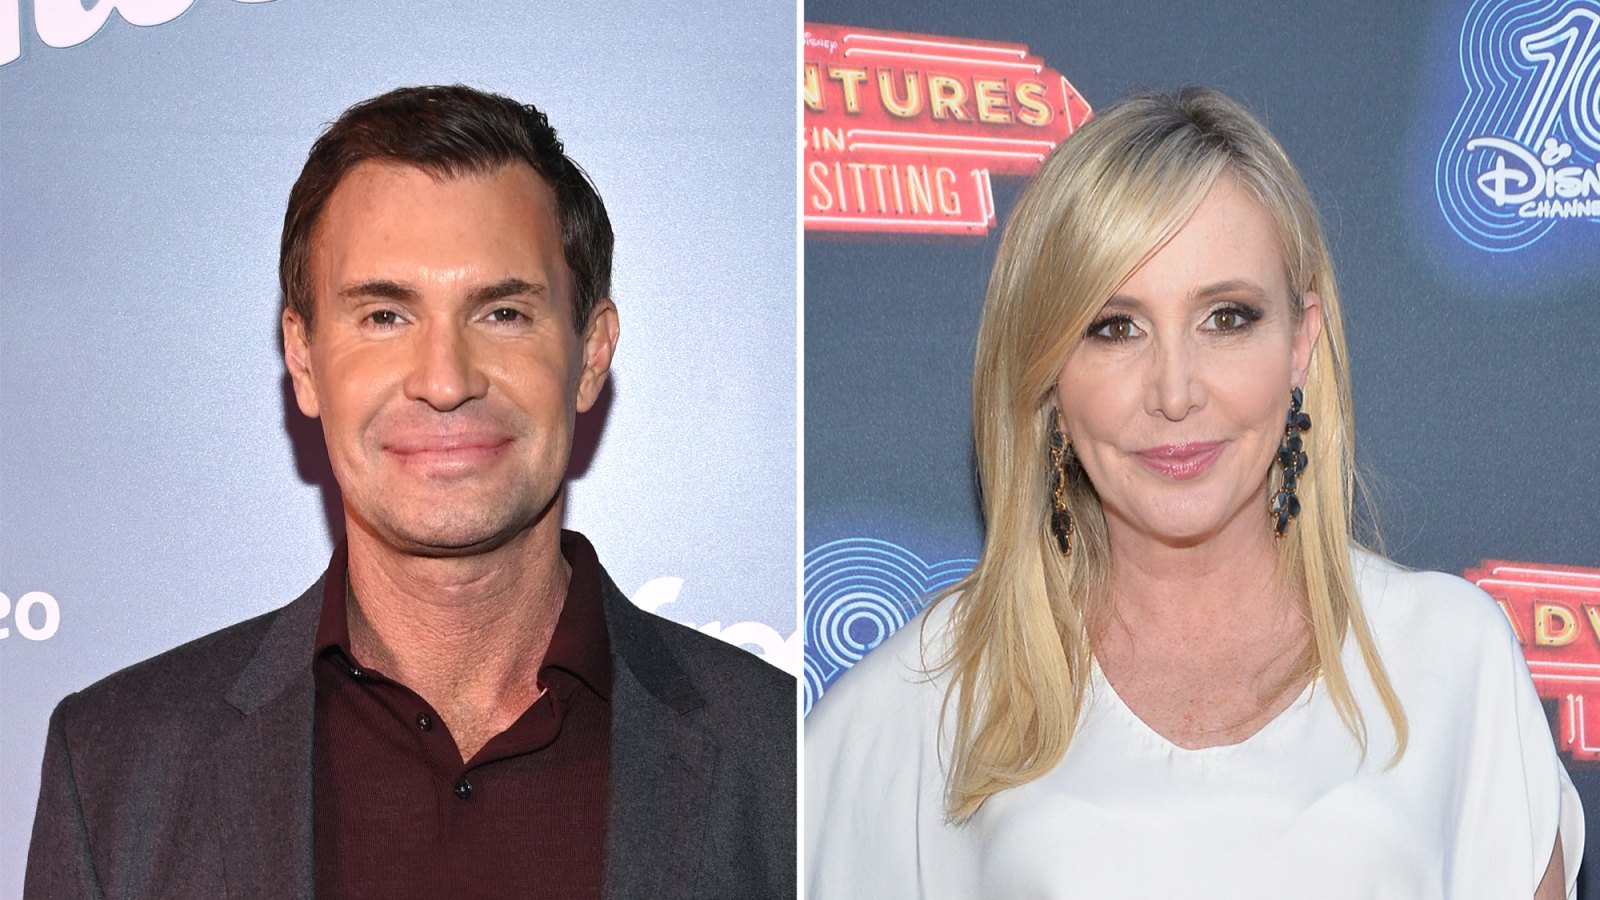 Jeff Lewis on Shannon Beador Starting Counseling After DUI Arrest